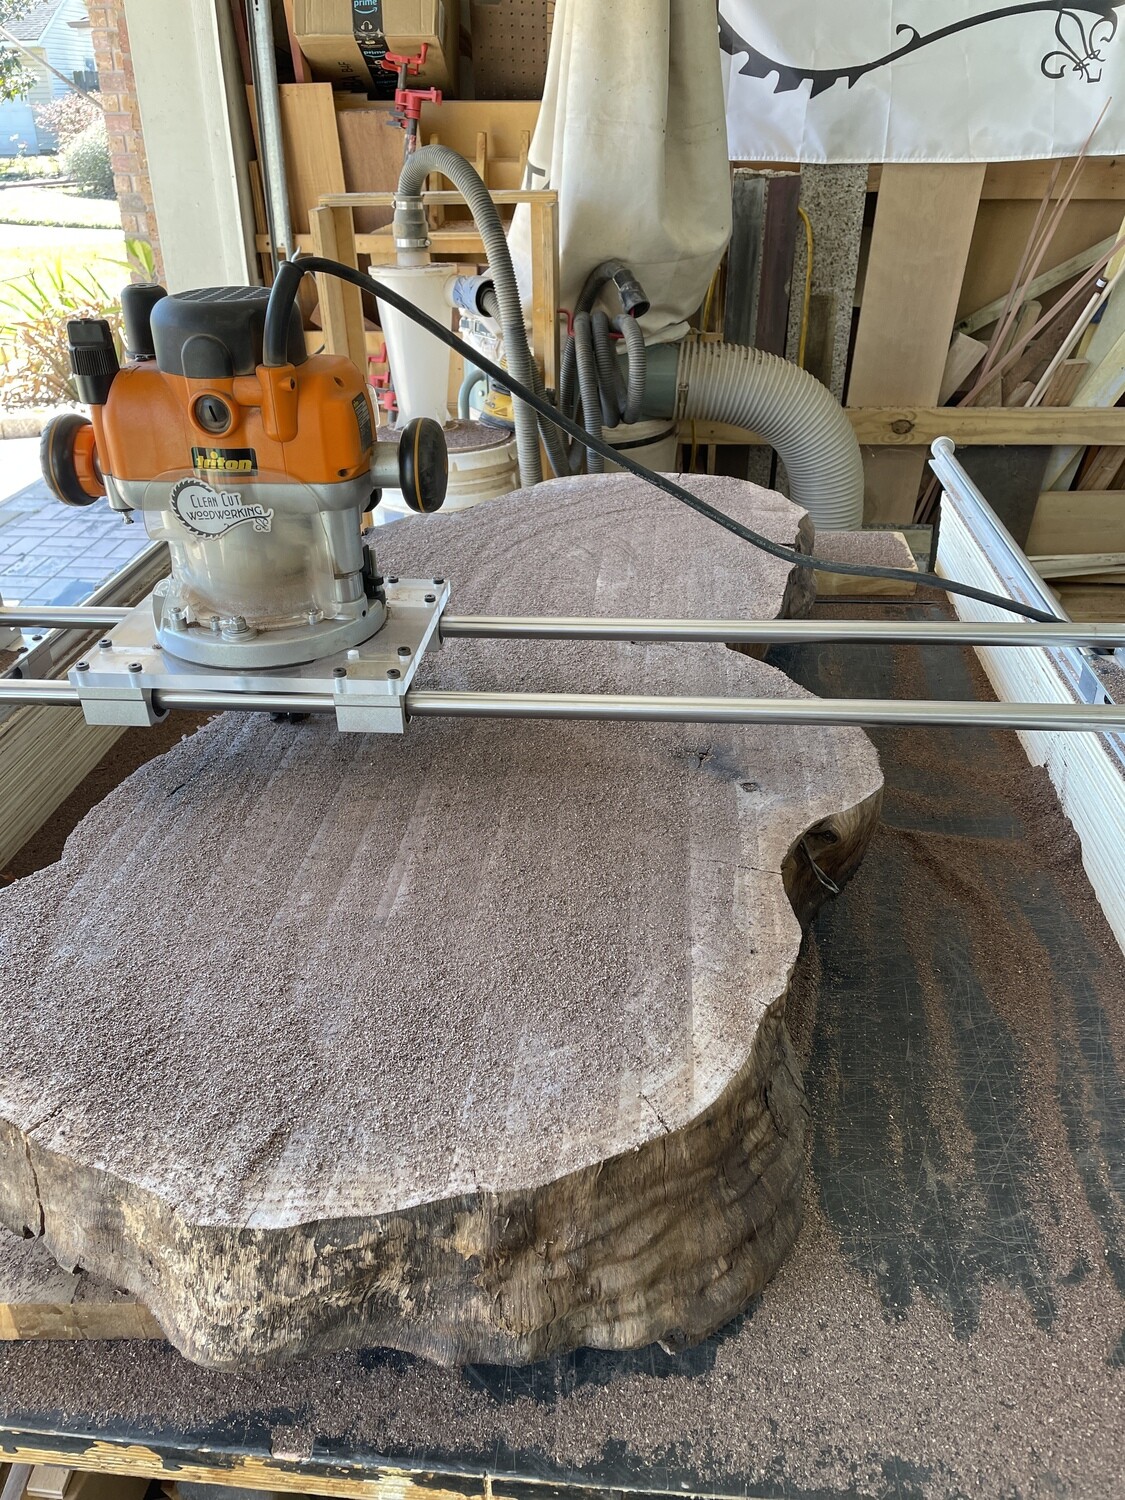 40"x60" Woodworking Router Sled